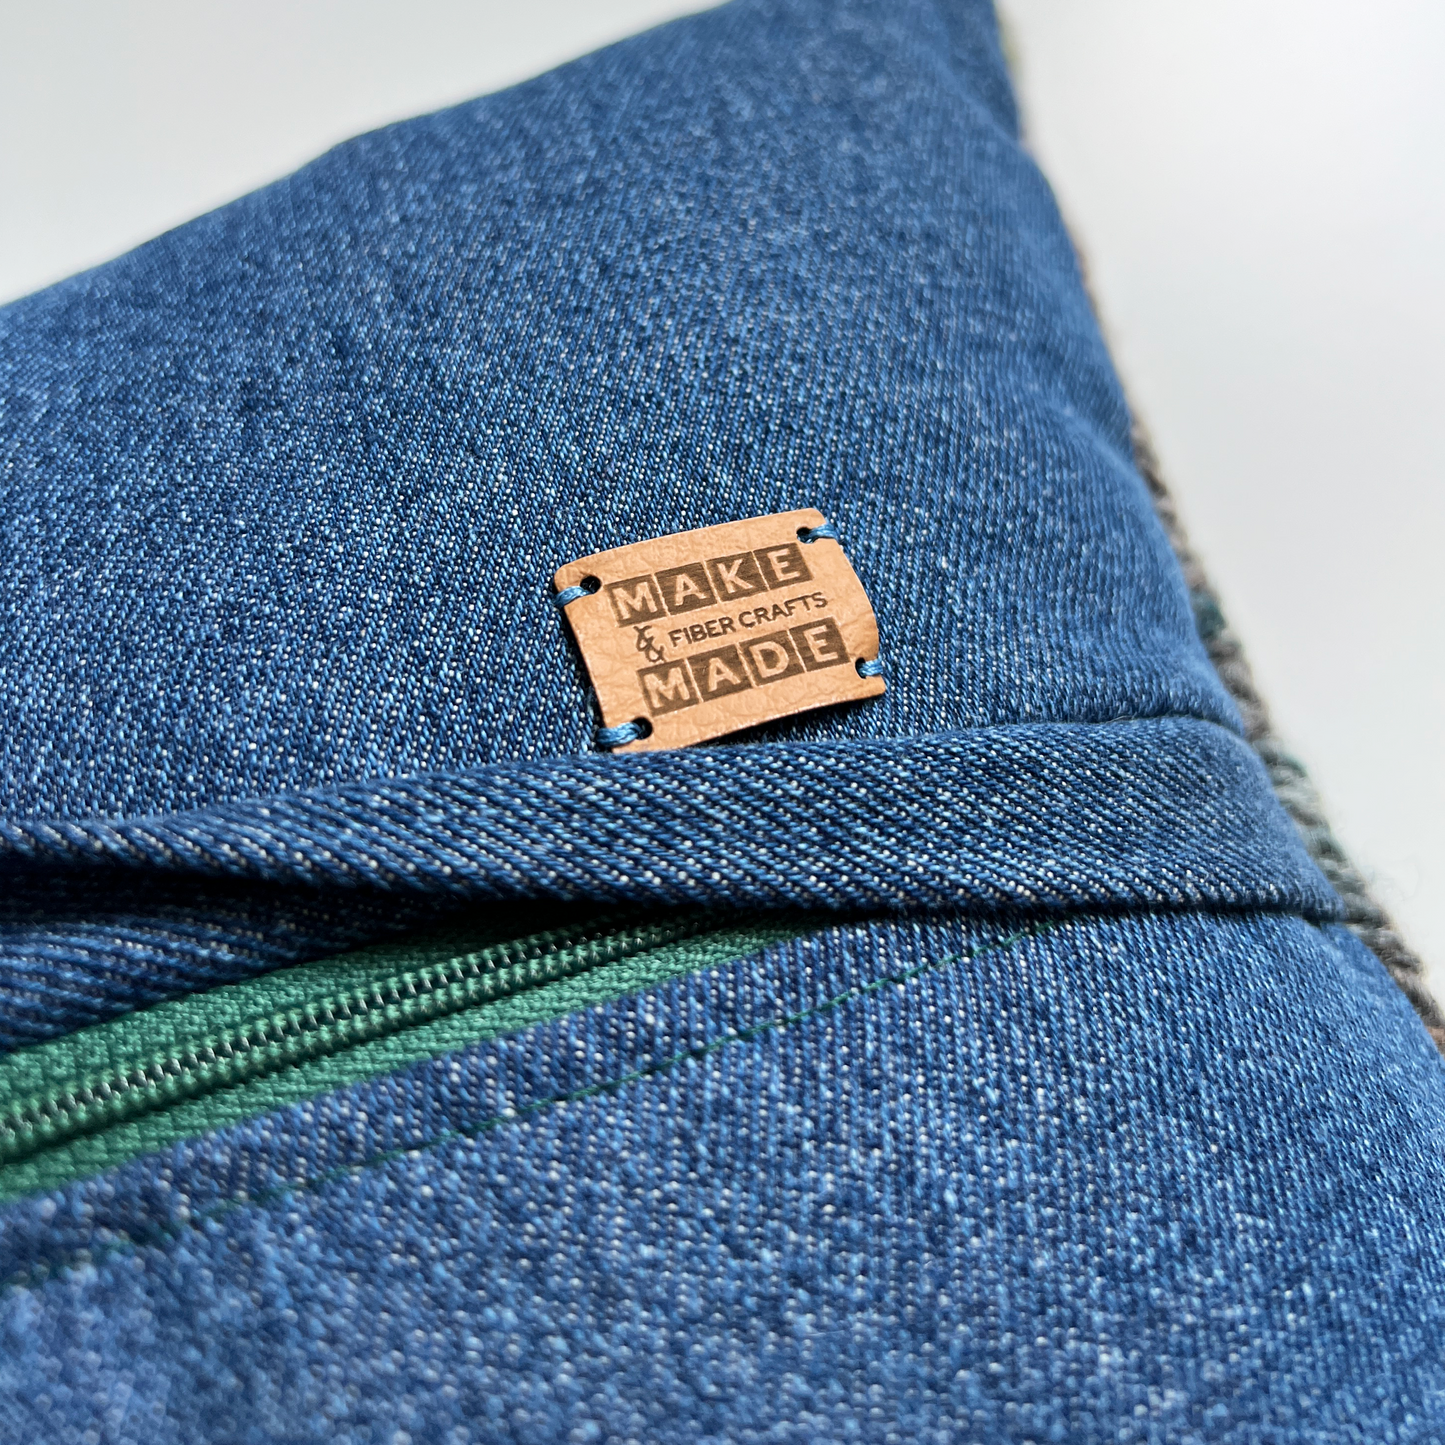 A complementary hunter green zipper is hidden beneath a denim flap on the back of the pillow, making this pillow cover easy to remove for spot cleaning.